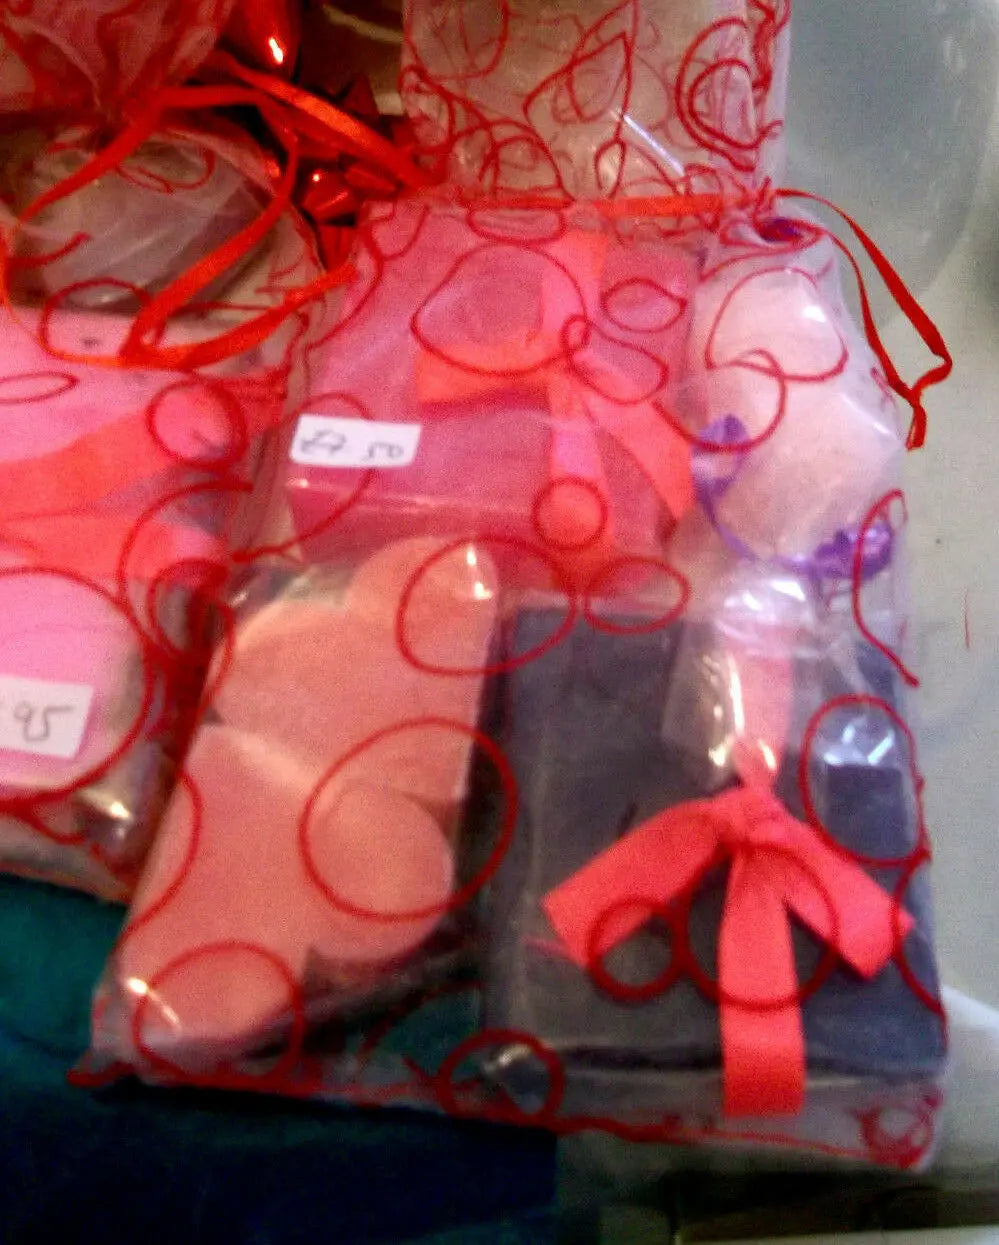 valentines day/mothers day HAND-MADE SOAP & chill pills- 5- GIFT BAGS5.perfect Handmade